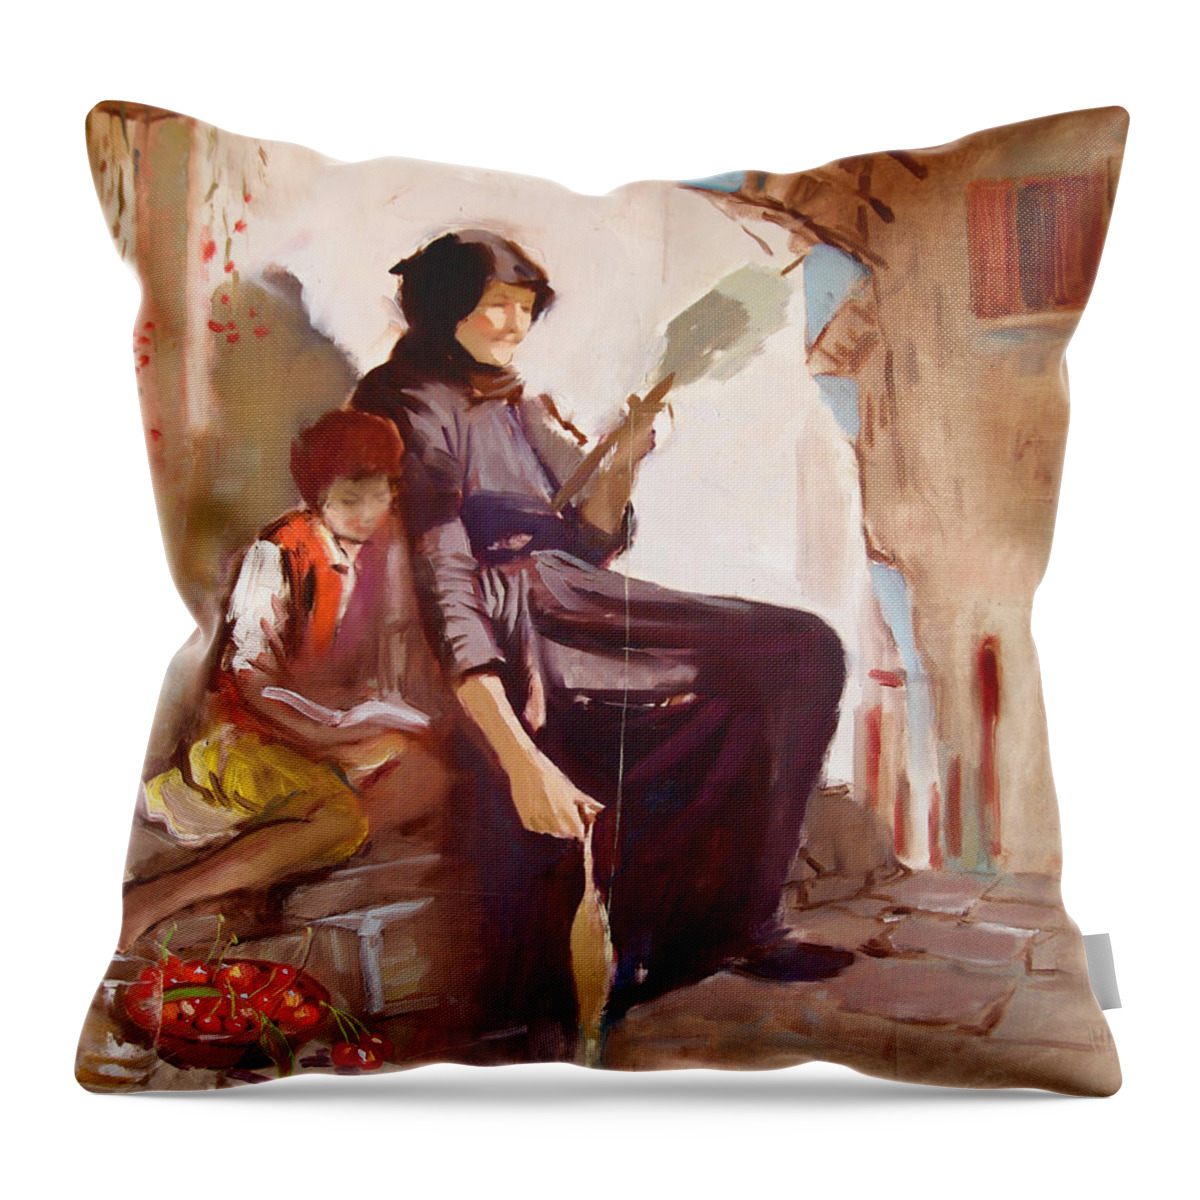 At The Doorstep Throw Pillow featuring the painting At the Doorstep by Ylli Haruni